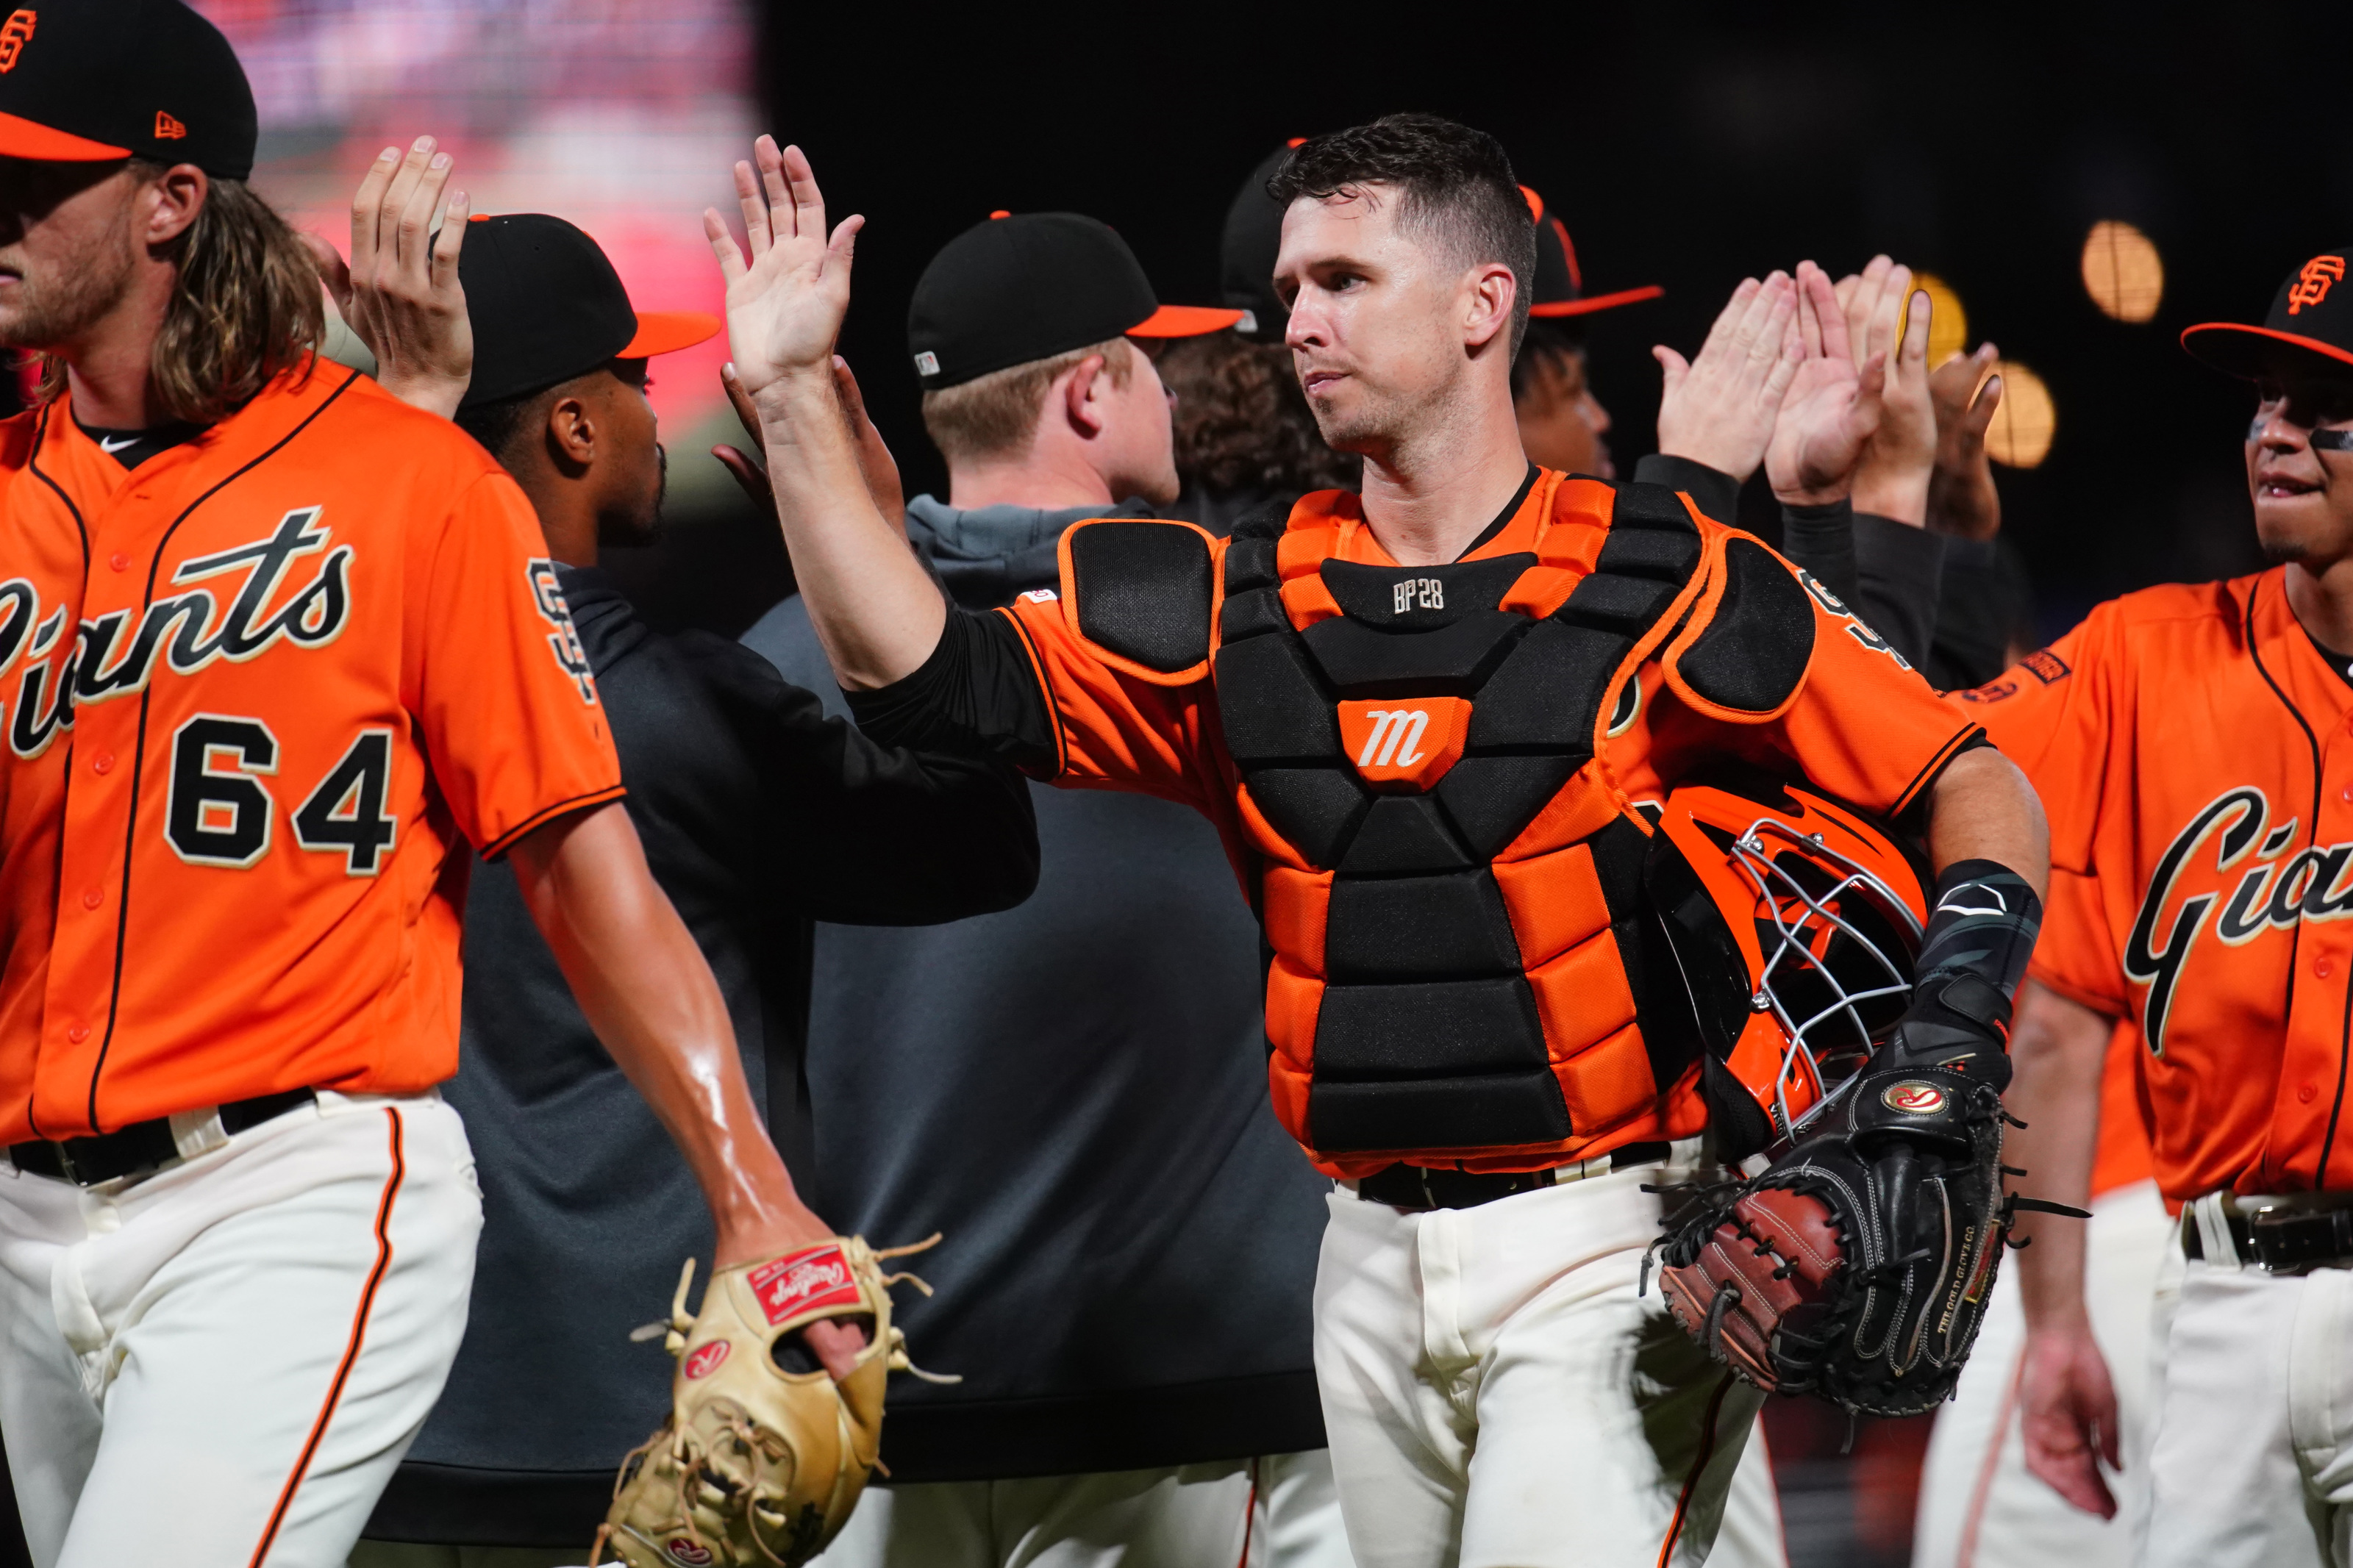 How Many Gold Gloves Does Buster Posey Have?